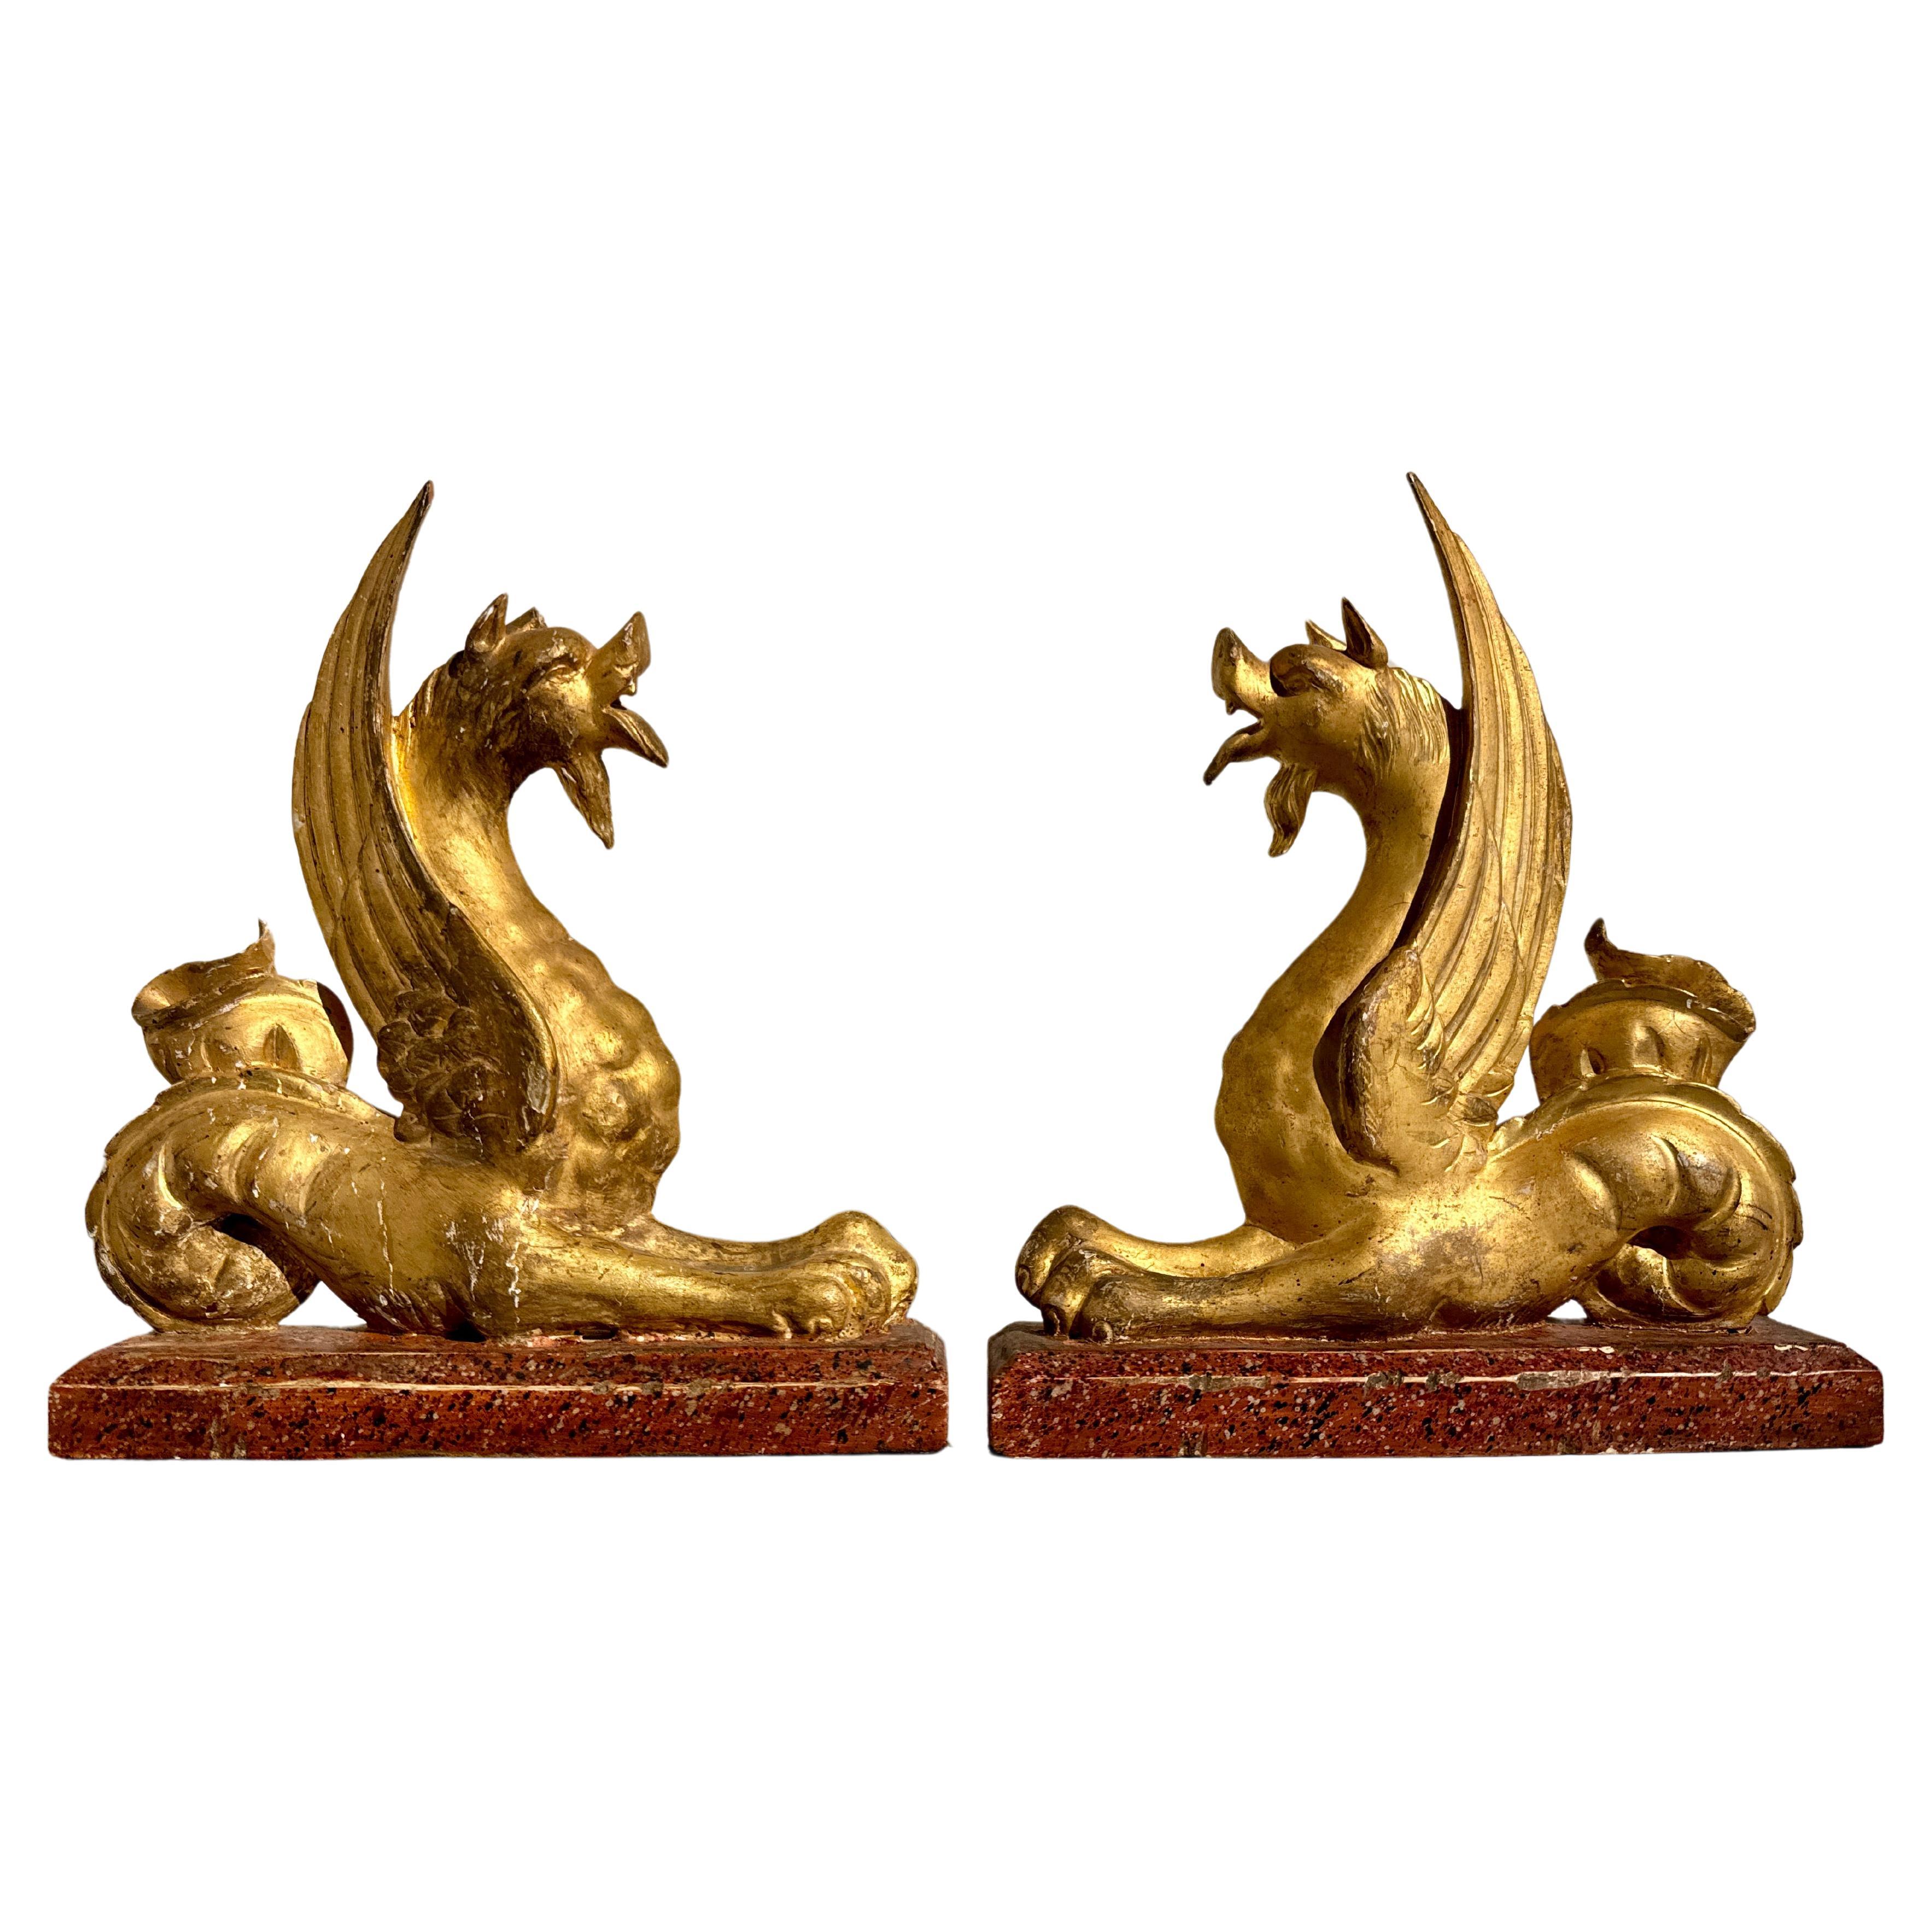 Pair Italian Neoclassical Craved and Gilt Wood Mythical Beasts, mid 19th century For Sale